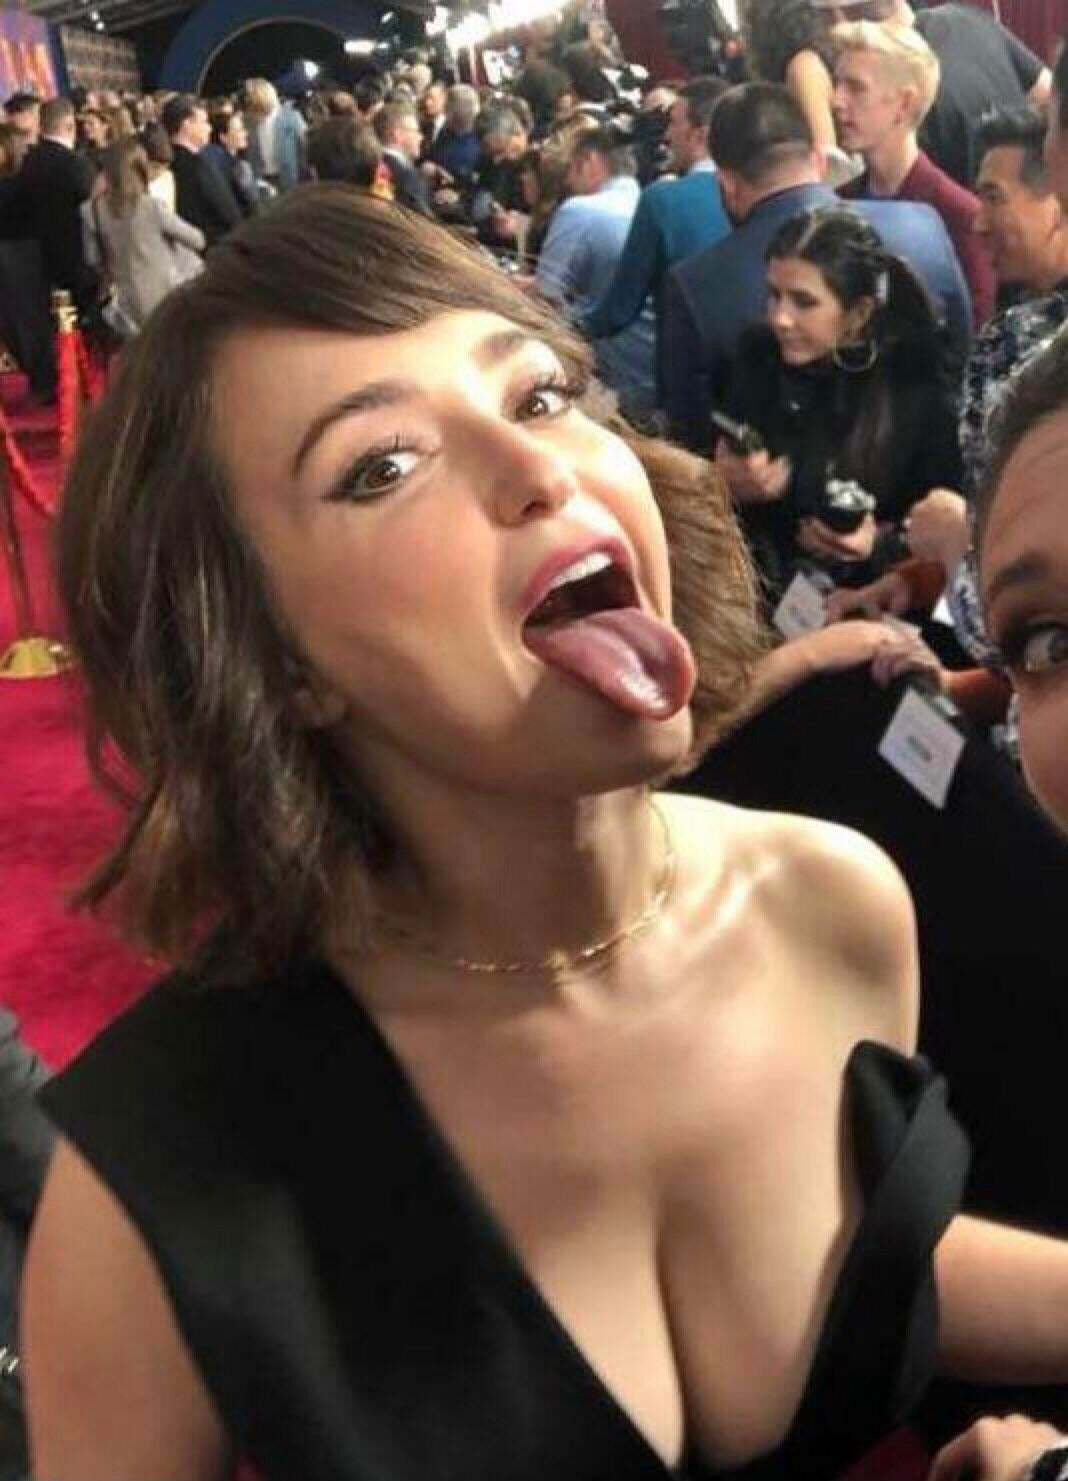 Milana Vayntrub turns me on showing her cleavage and sticking